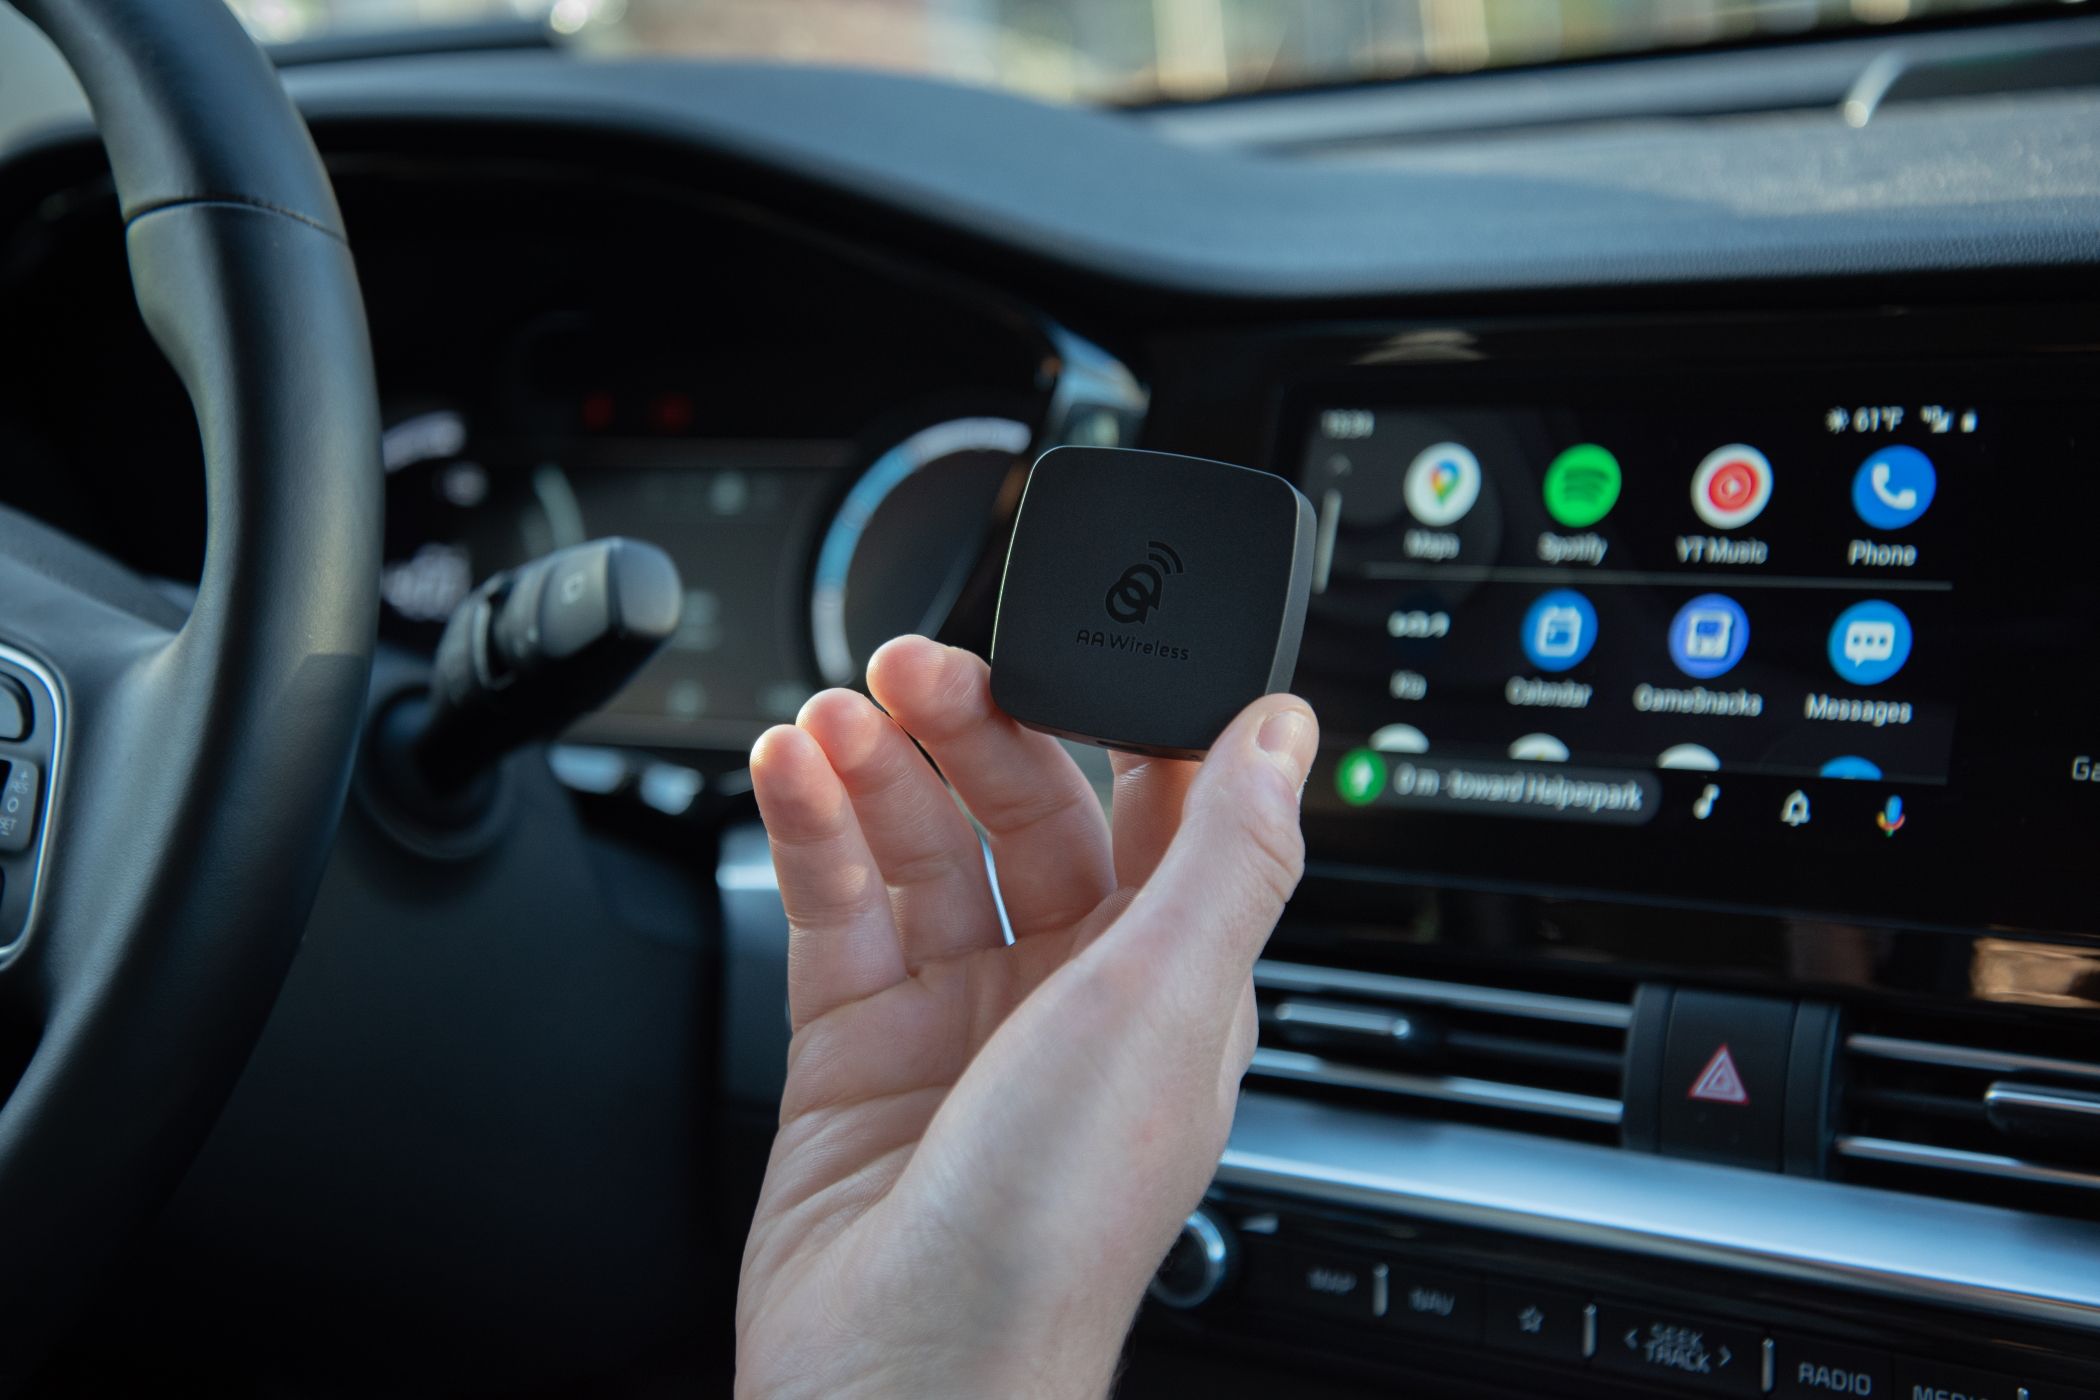 AAWireless Android Auto Adapter Being Held Inside of Car